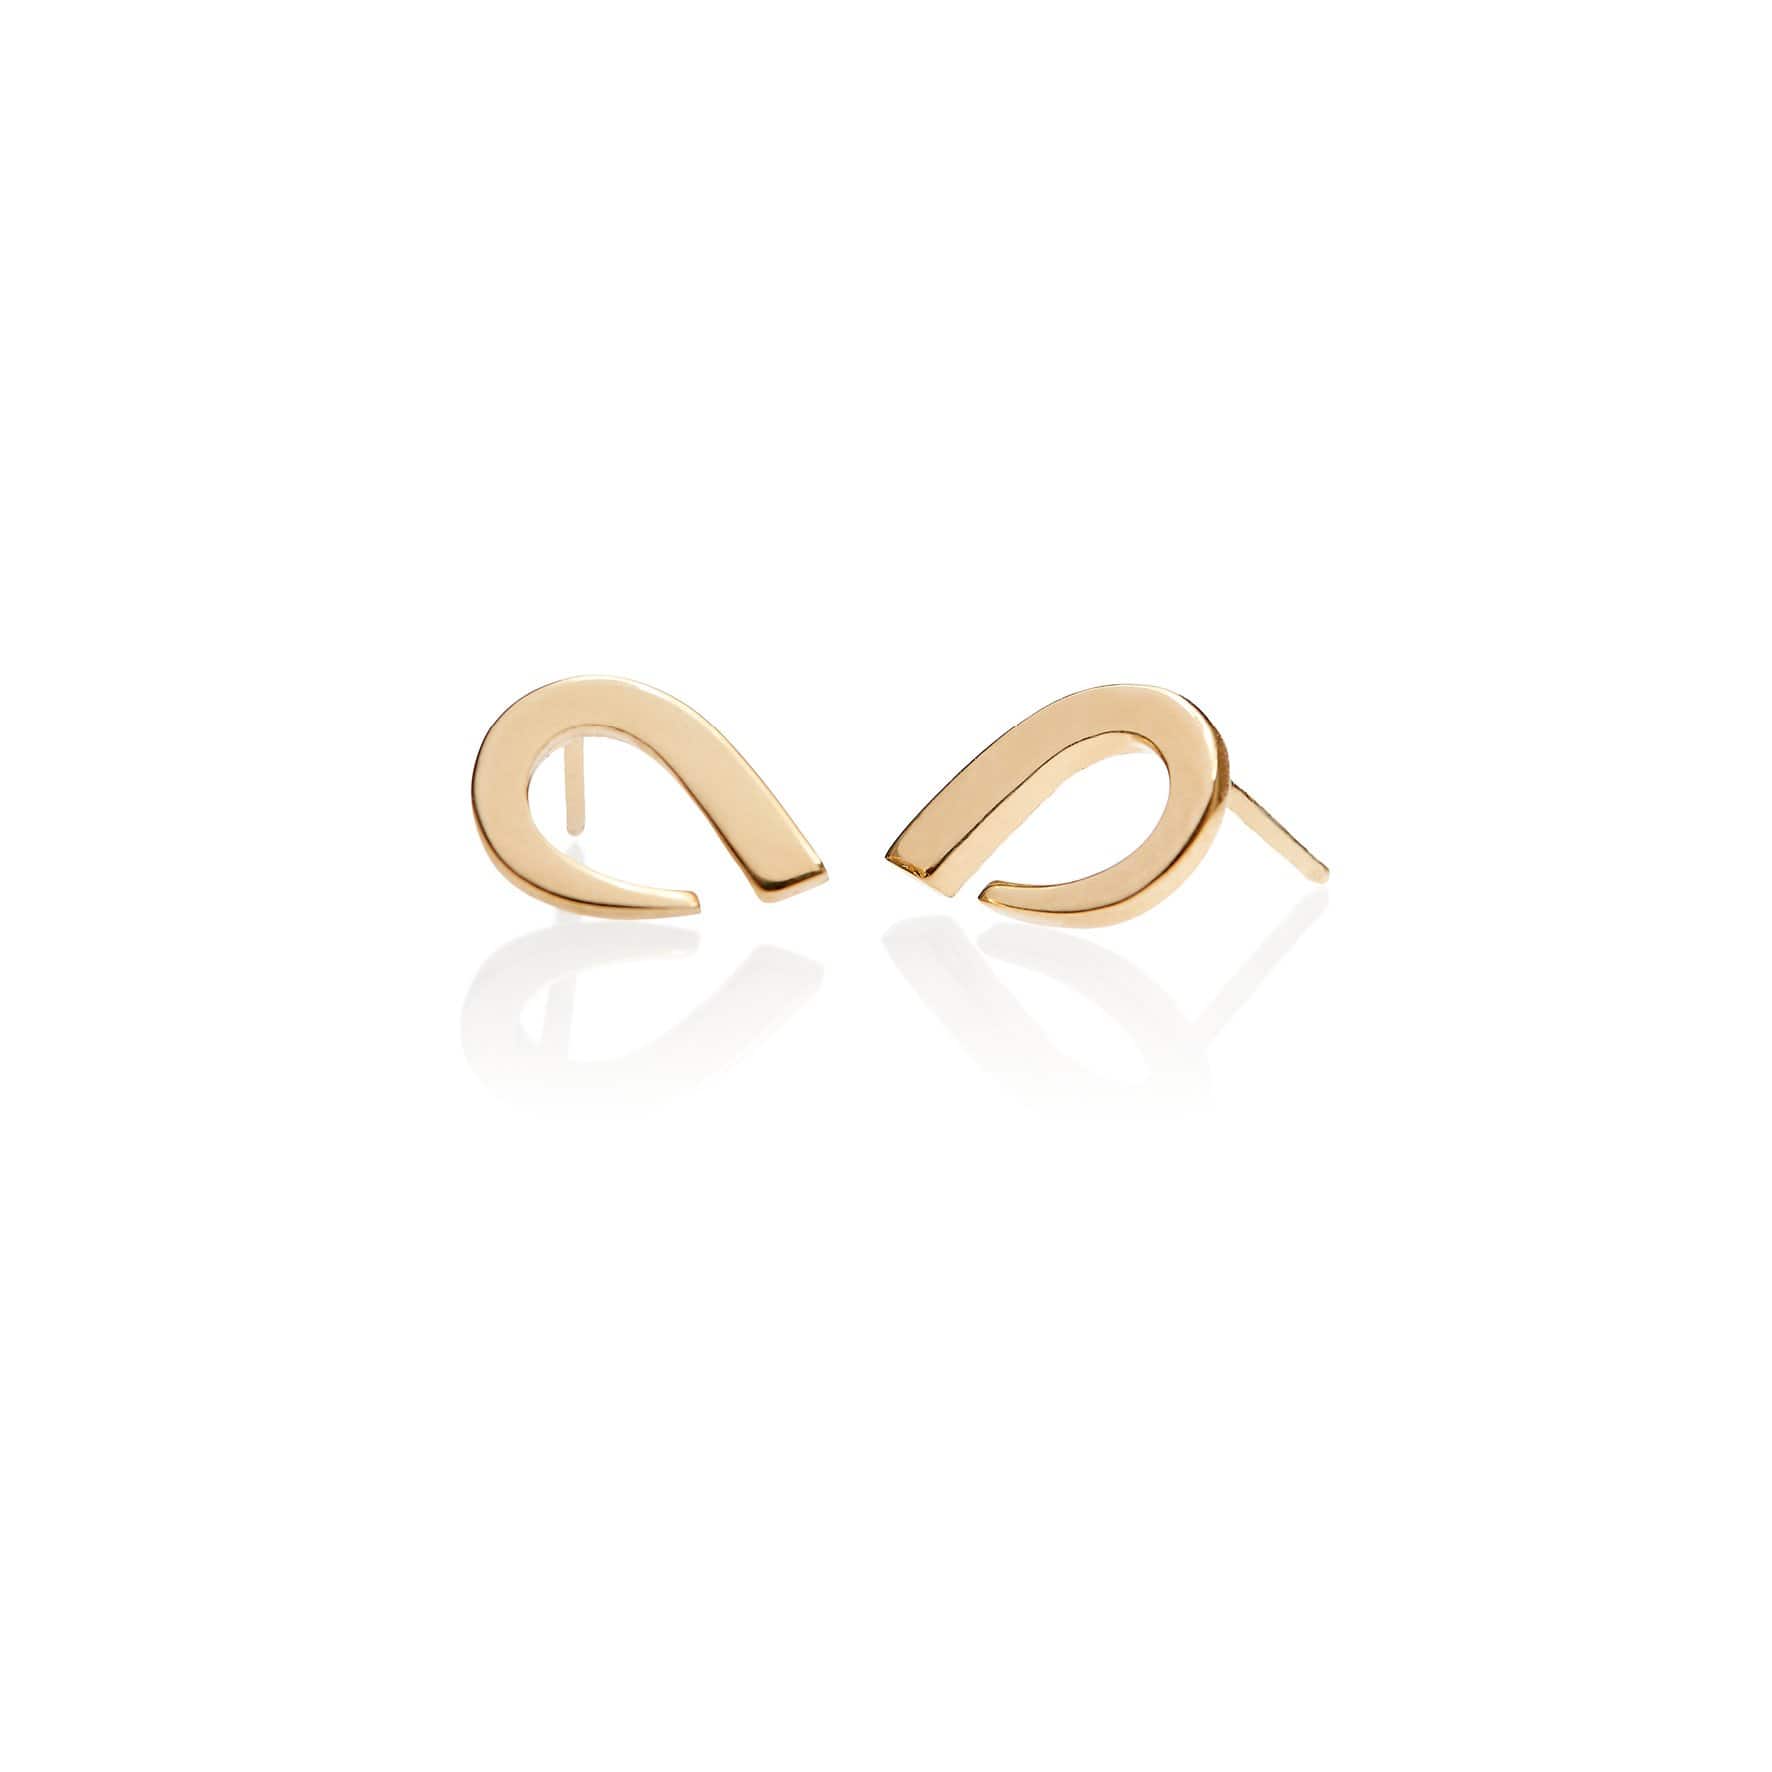 Rounded small gold earrings from the Pulpit Rock collection